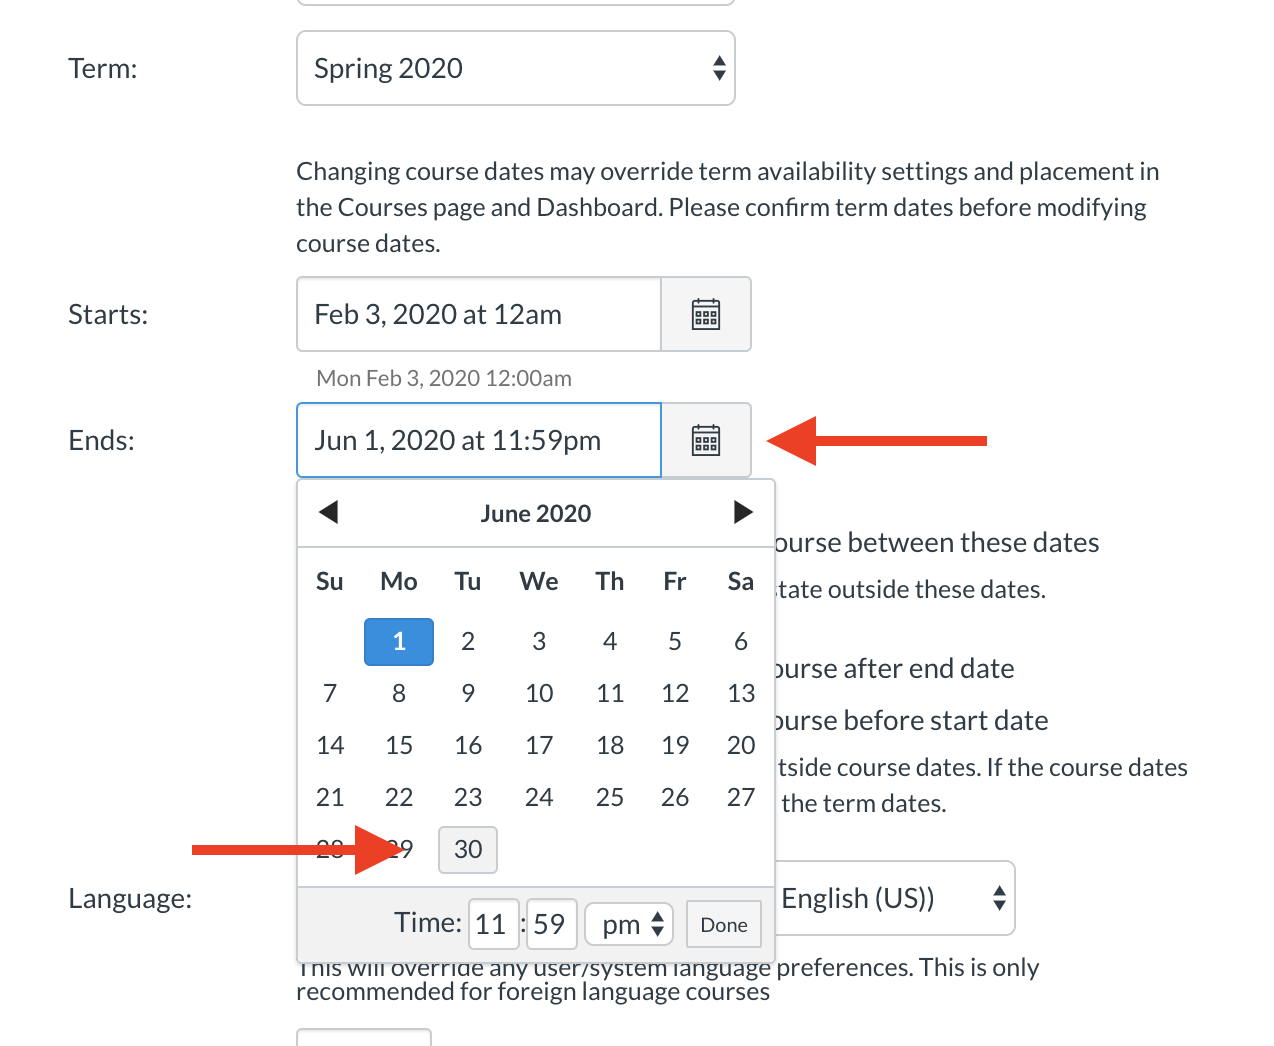 PAST ENROLLMENTS IN CANVAS: LIMITING OR EXTENDING STUDENT ACCESS TO